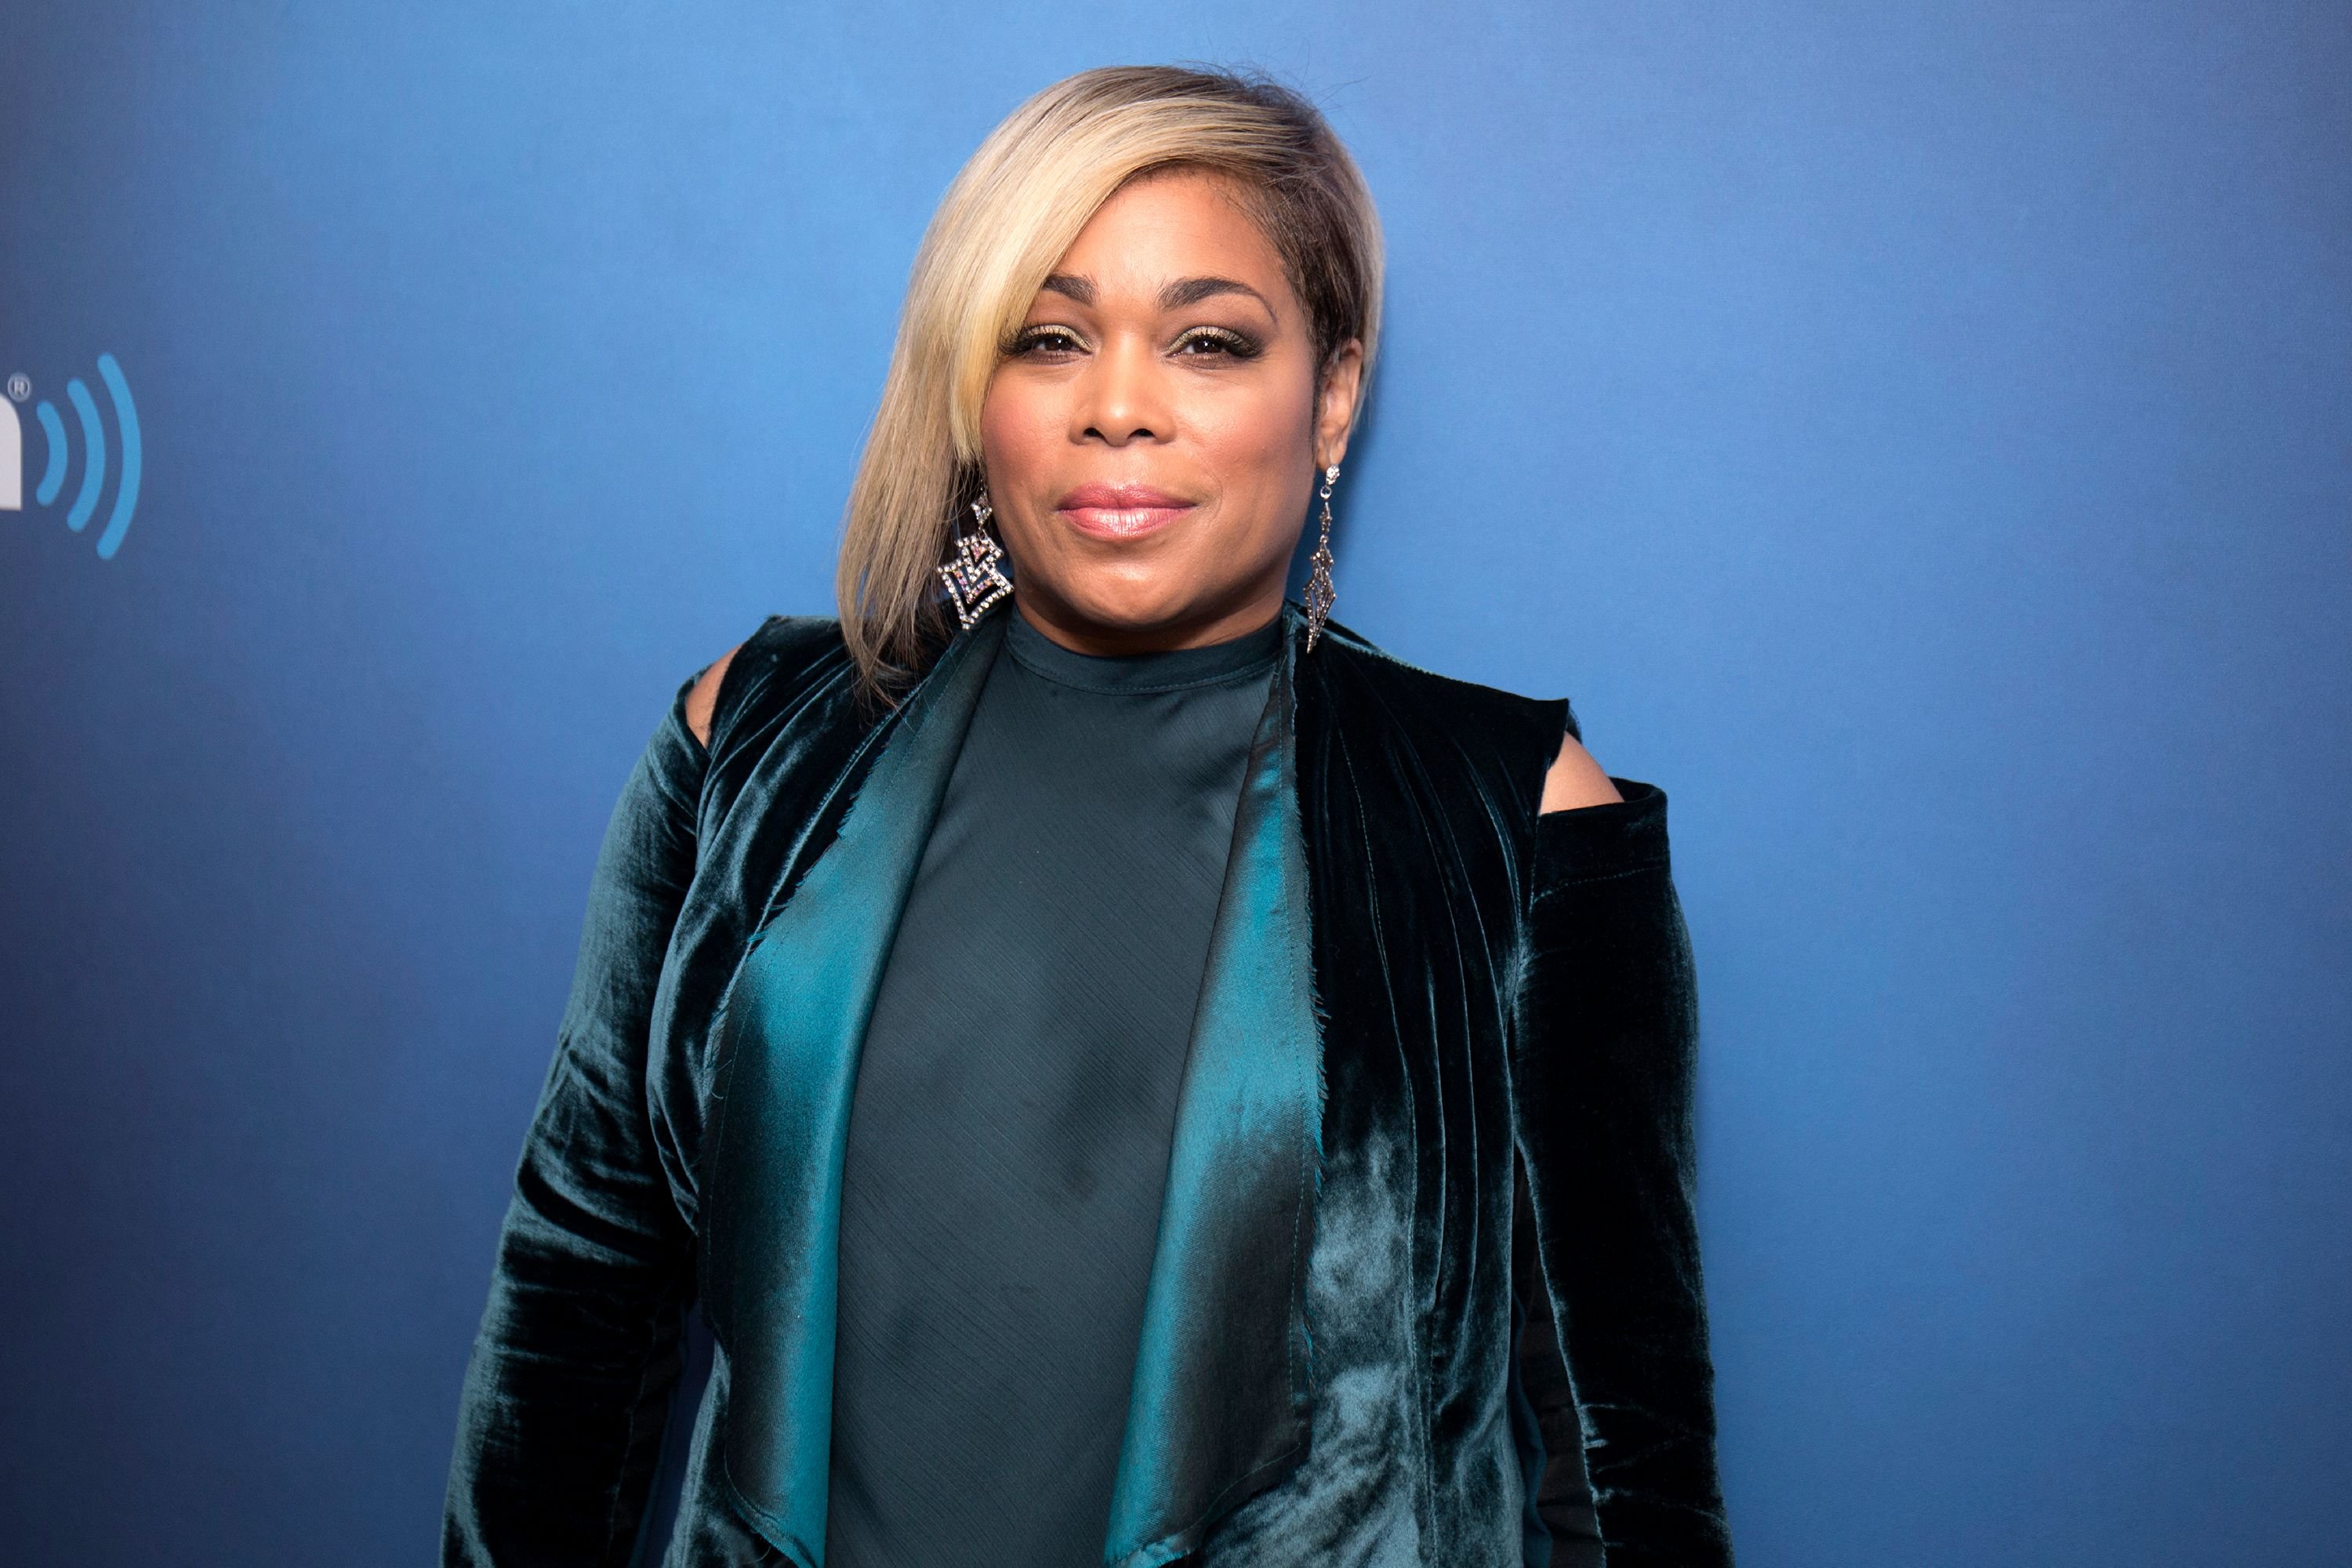 Tionne "T-Boz" Watkins at SiriusXM Studios on September 12, 2017 in New York City | Photo: Getty Images